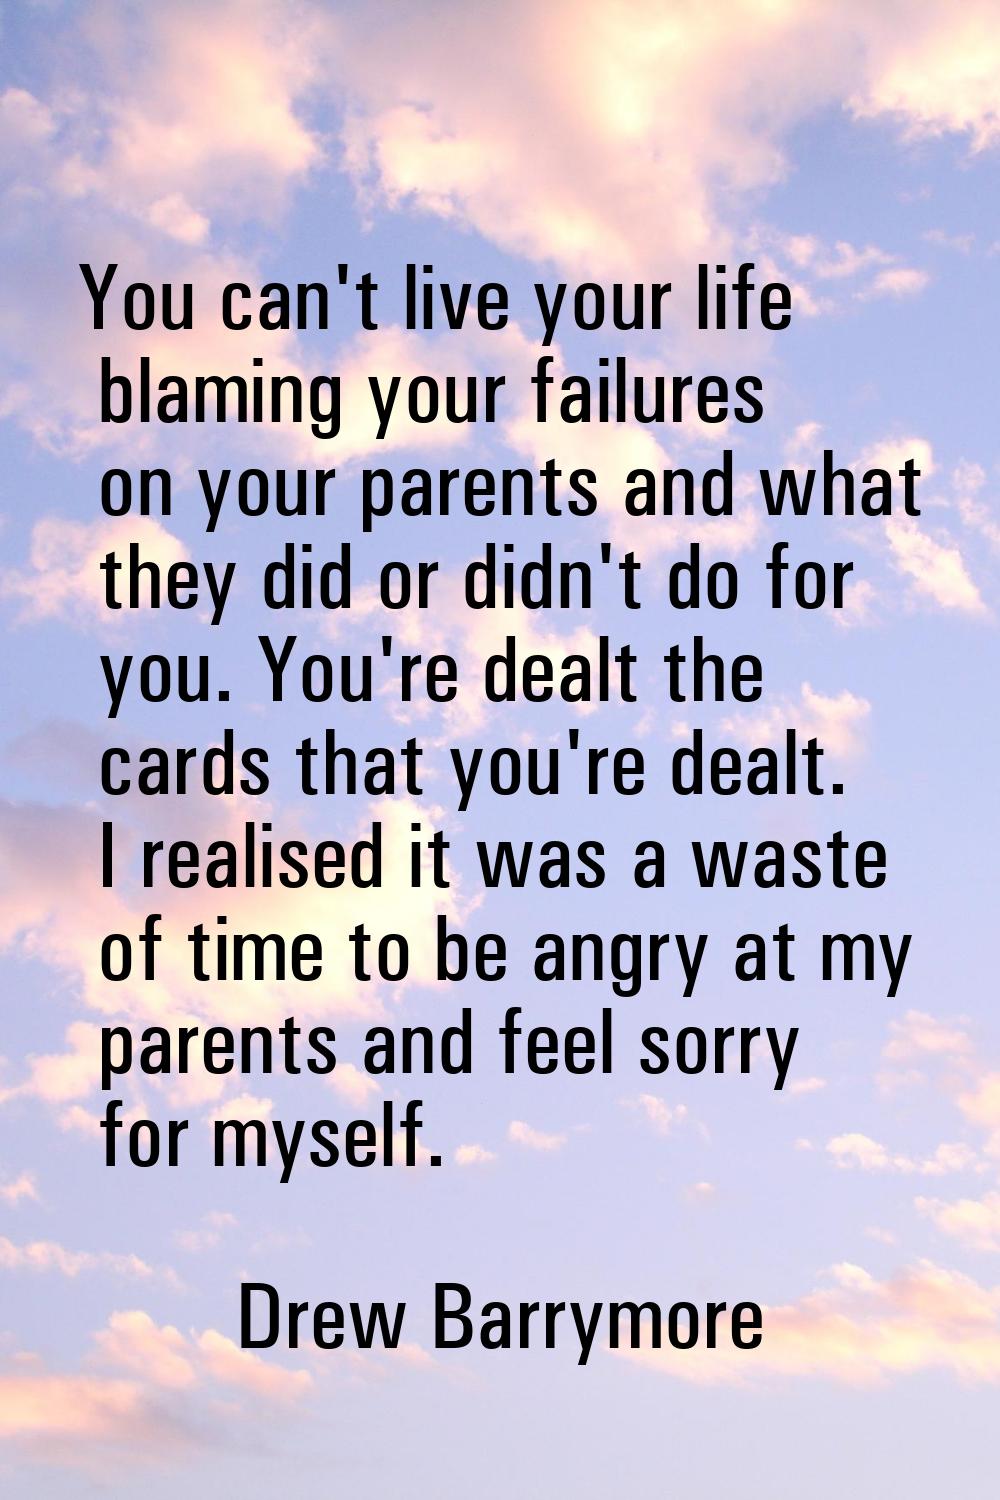 You can't live your life blaming your failures on your parents and what they did or didn't do for y